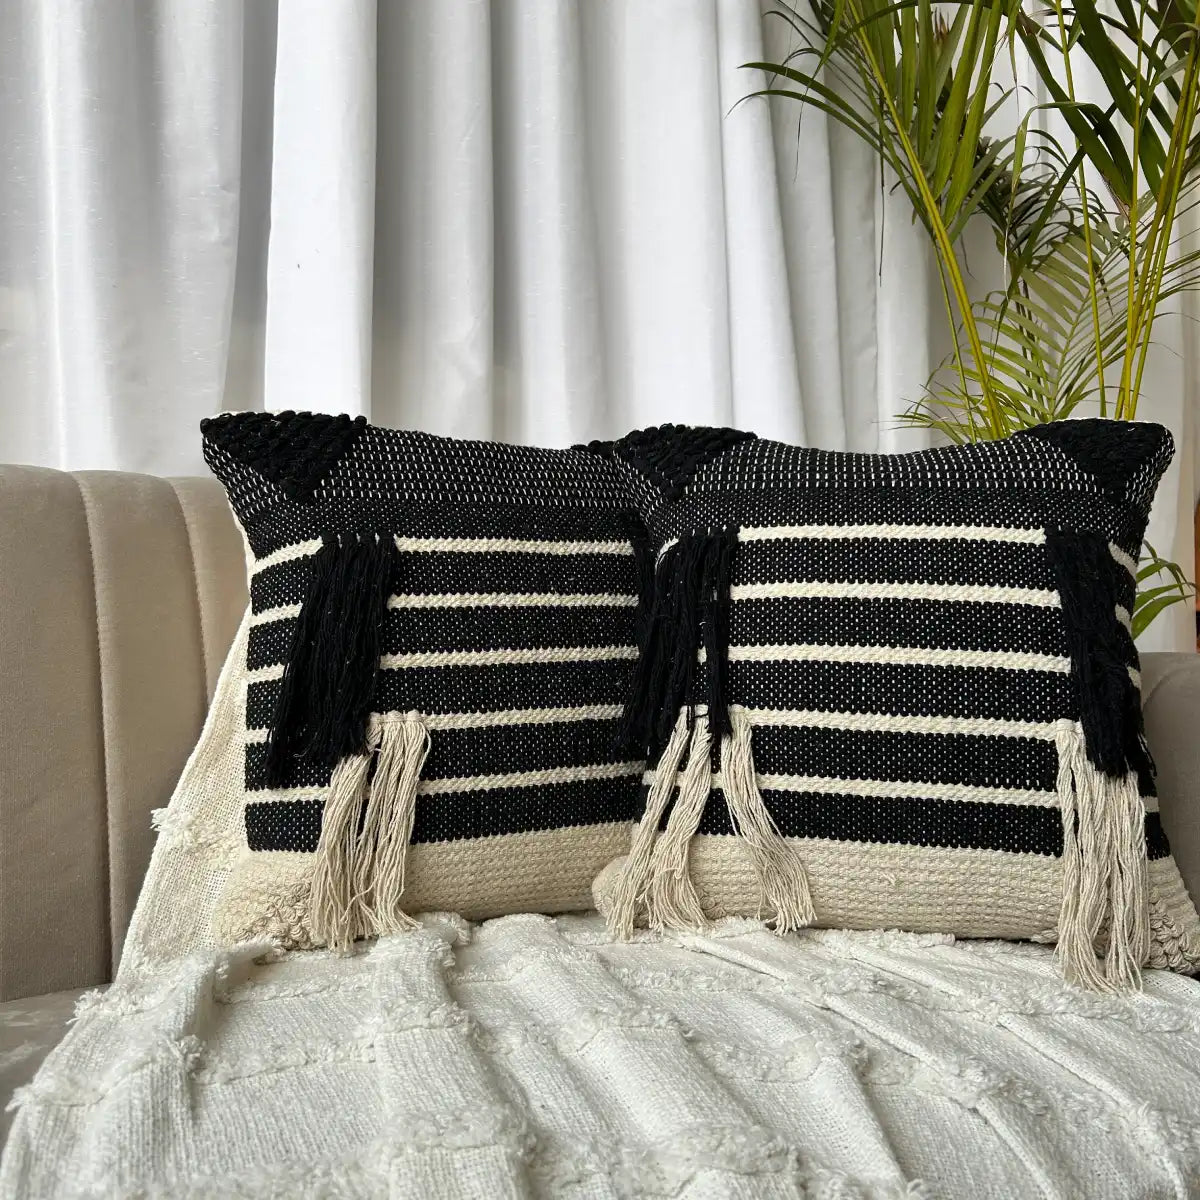 upgrade Your Space with a 16x16 Inch Cotton Boho Cushion Cover